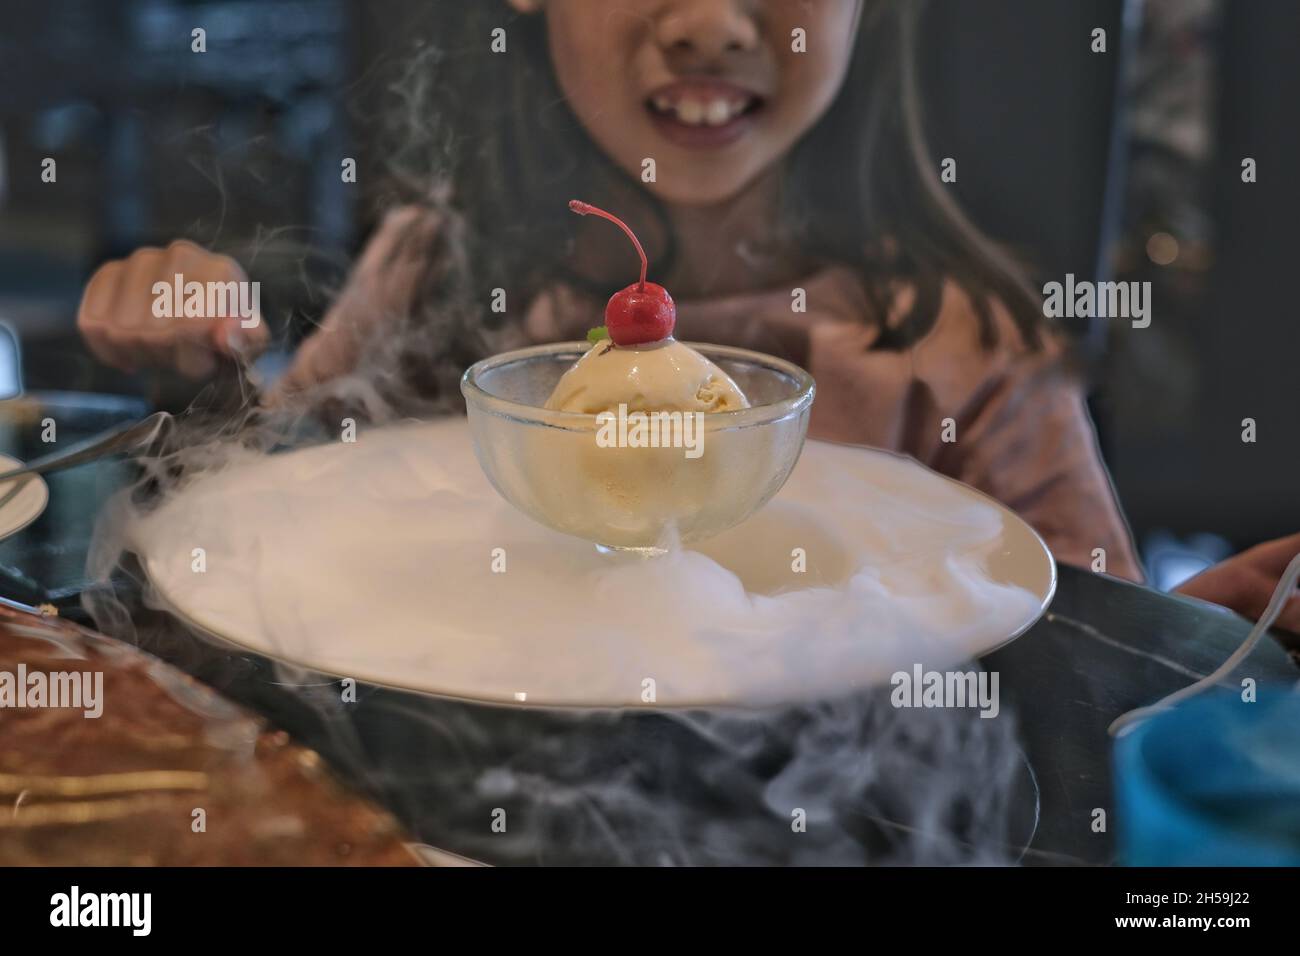 A cute young Asian girl is sitting in a restaurant, eating a bowl of vanilla ice cream, decorated by white smoke from dry ice, with cherry topping.  K Stock Photo